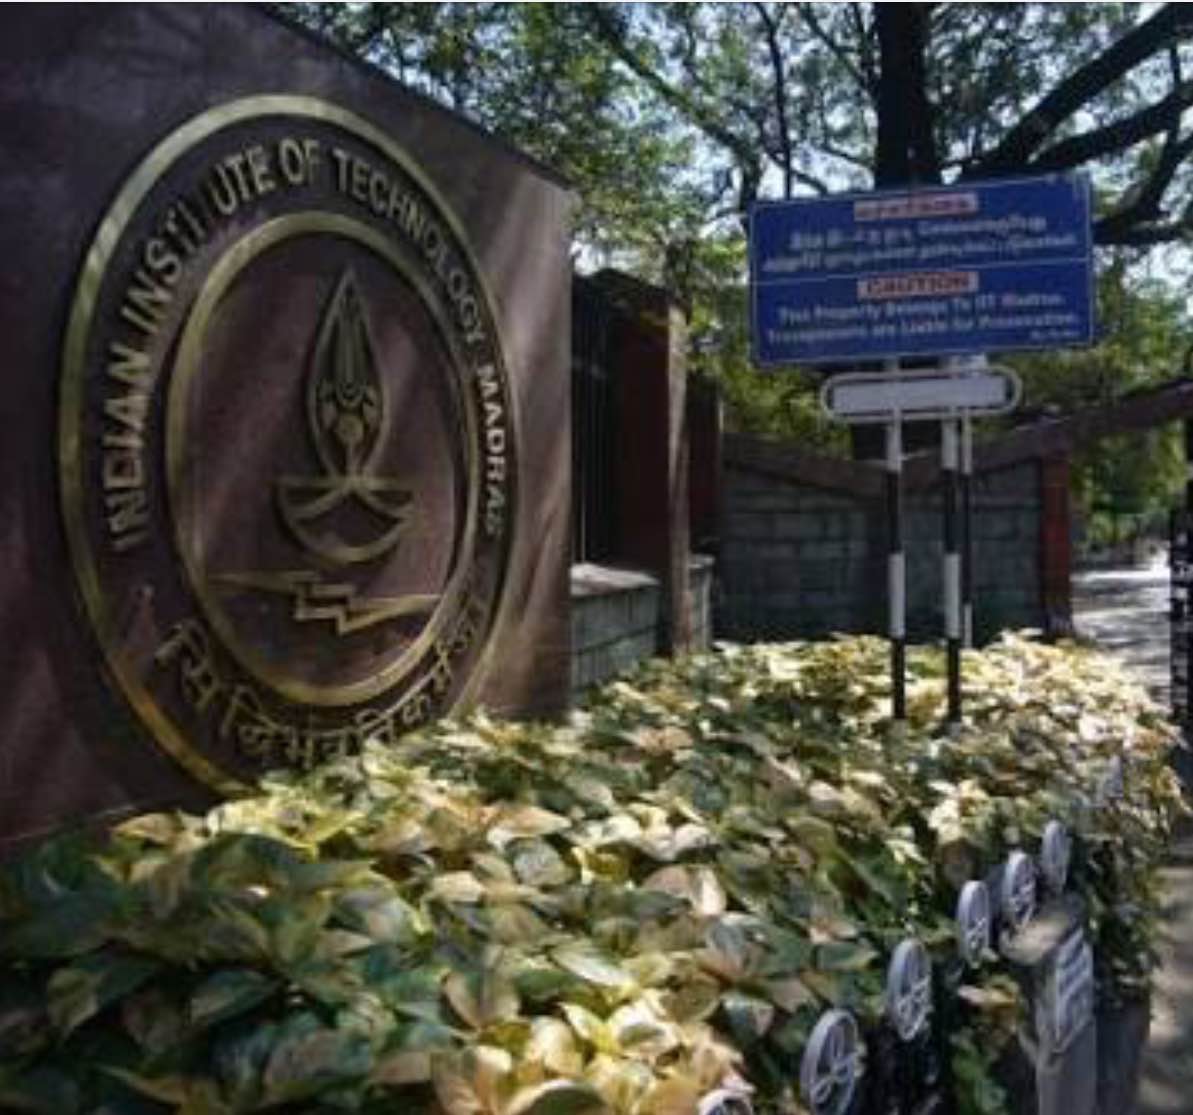 IITs, IIMs plan safety net for students after startup flip-flop